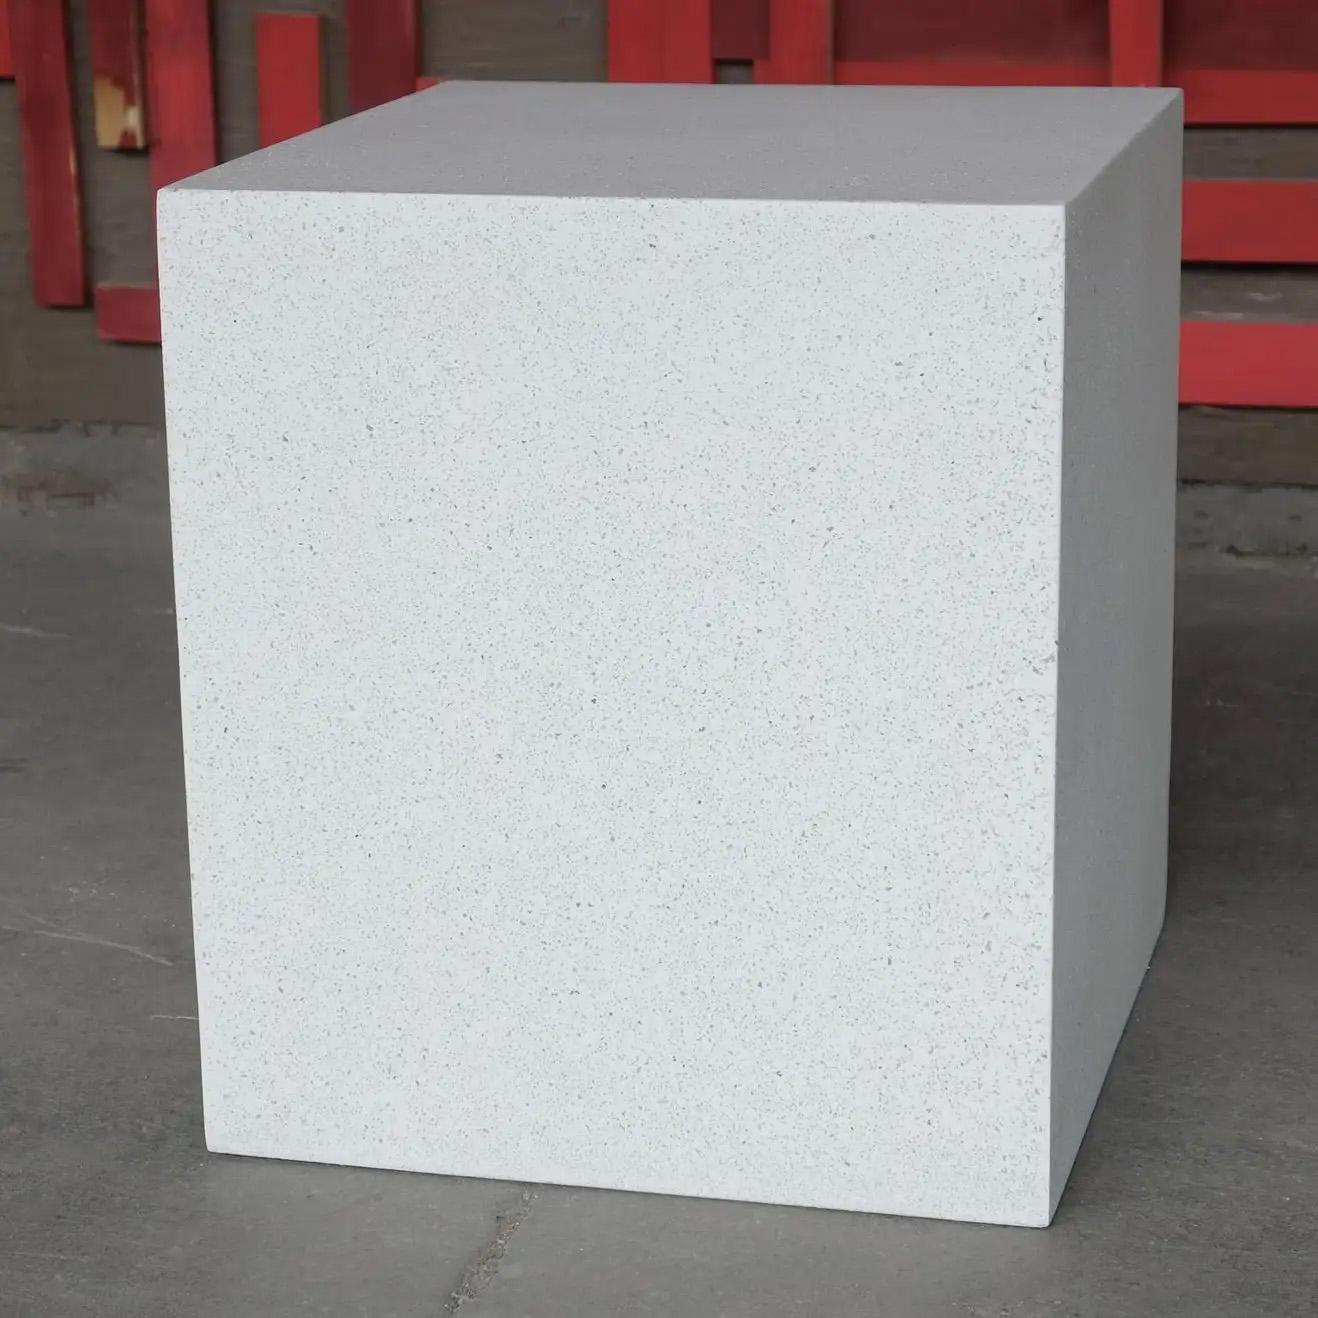 Minimalist Cast Resin 'Square' Side Table, White Stone Finish by Zachary A. Design For Sale